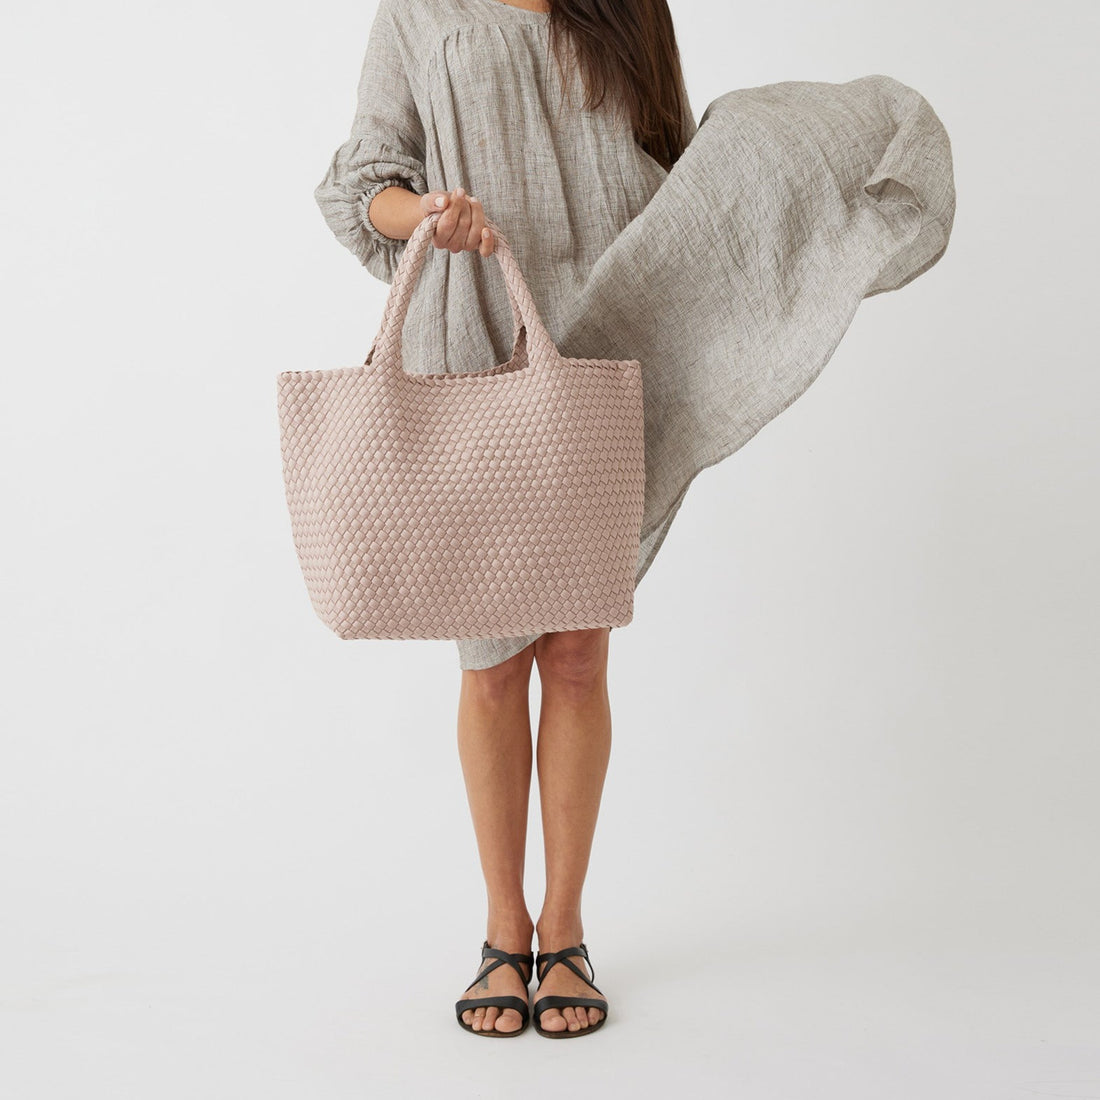 Andreina Bags Siempre tote bag in light pink colour. Colour name is rose. Large size yet lightweight. Handmade, interlaced material, synthetic material, water resistant, machine washable. Designed in Sydney, Australia.